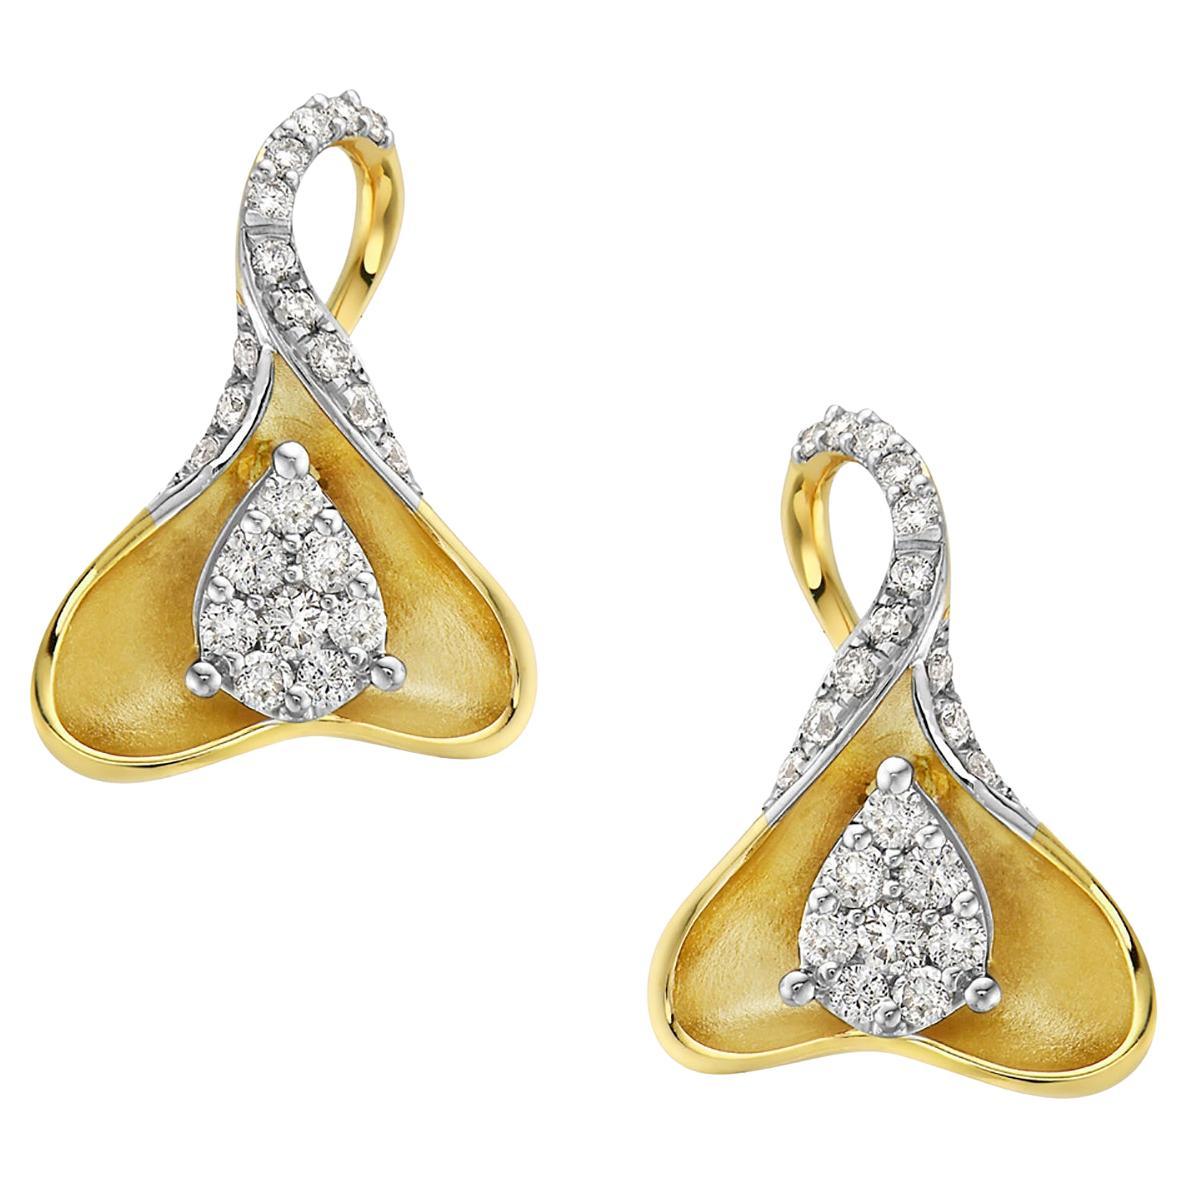 Folded Petal Shaped Stud Earrings Accented with Diamonds Made in 14k Yellow Gold For Sale